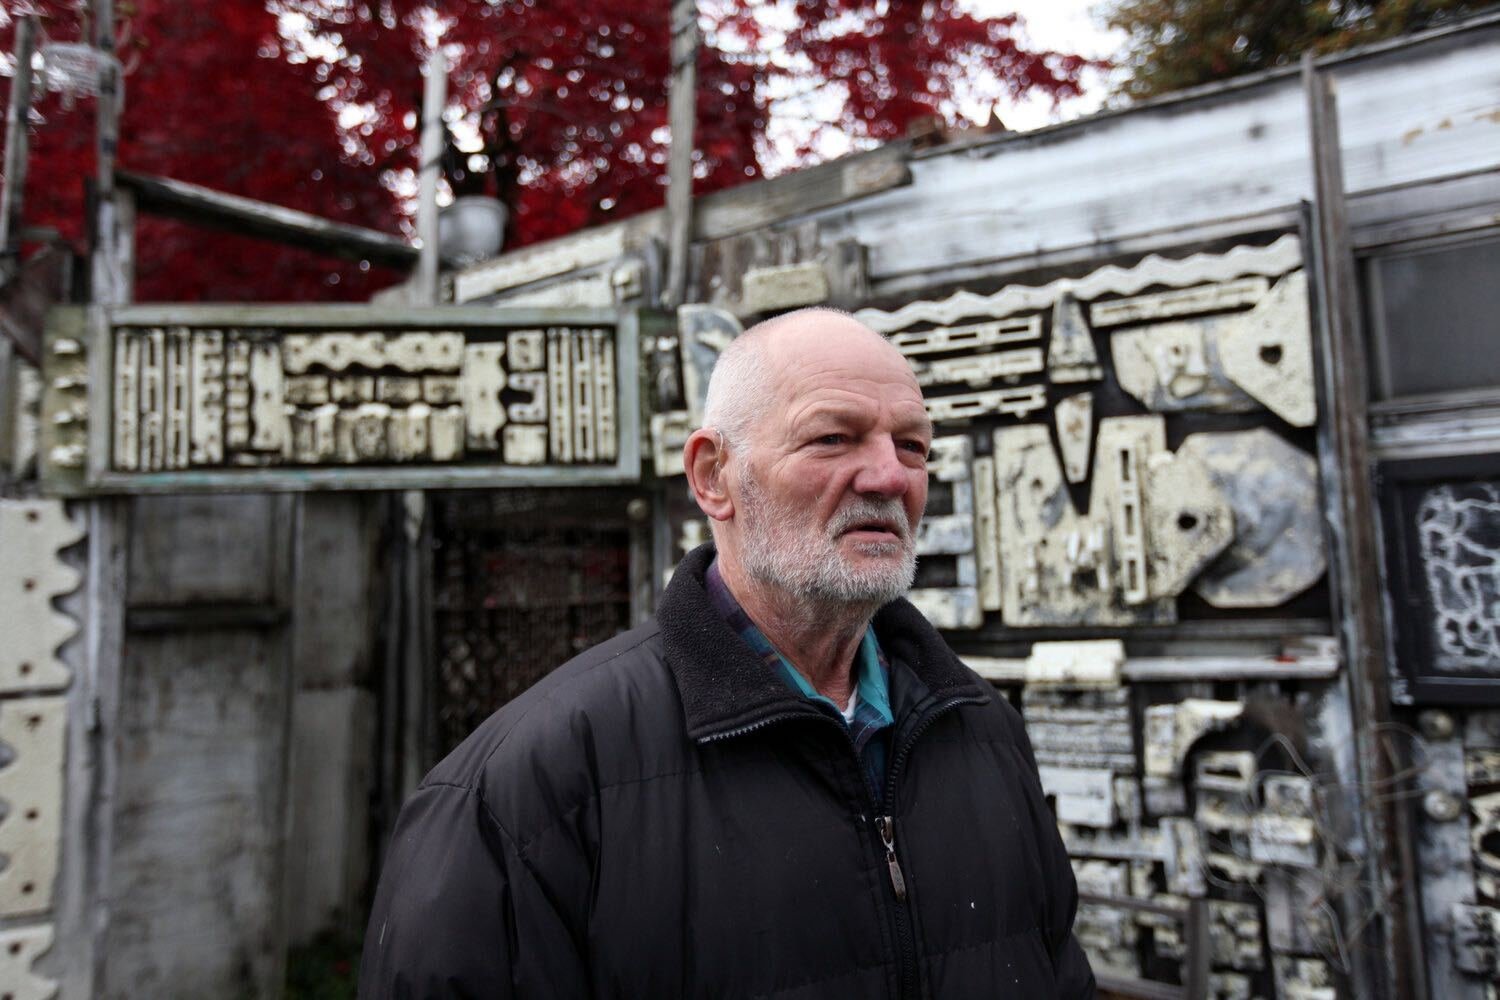 Richard 'RichArt' Tracy, Eccentric Centralia Artist Who Gained Regional Fame, Dies at 89 - Centralia Chronicle